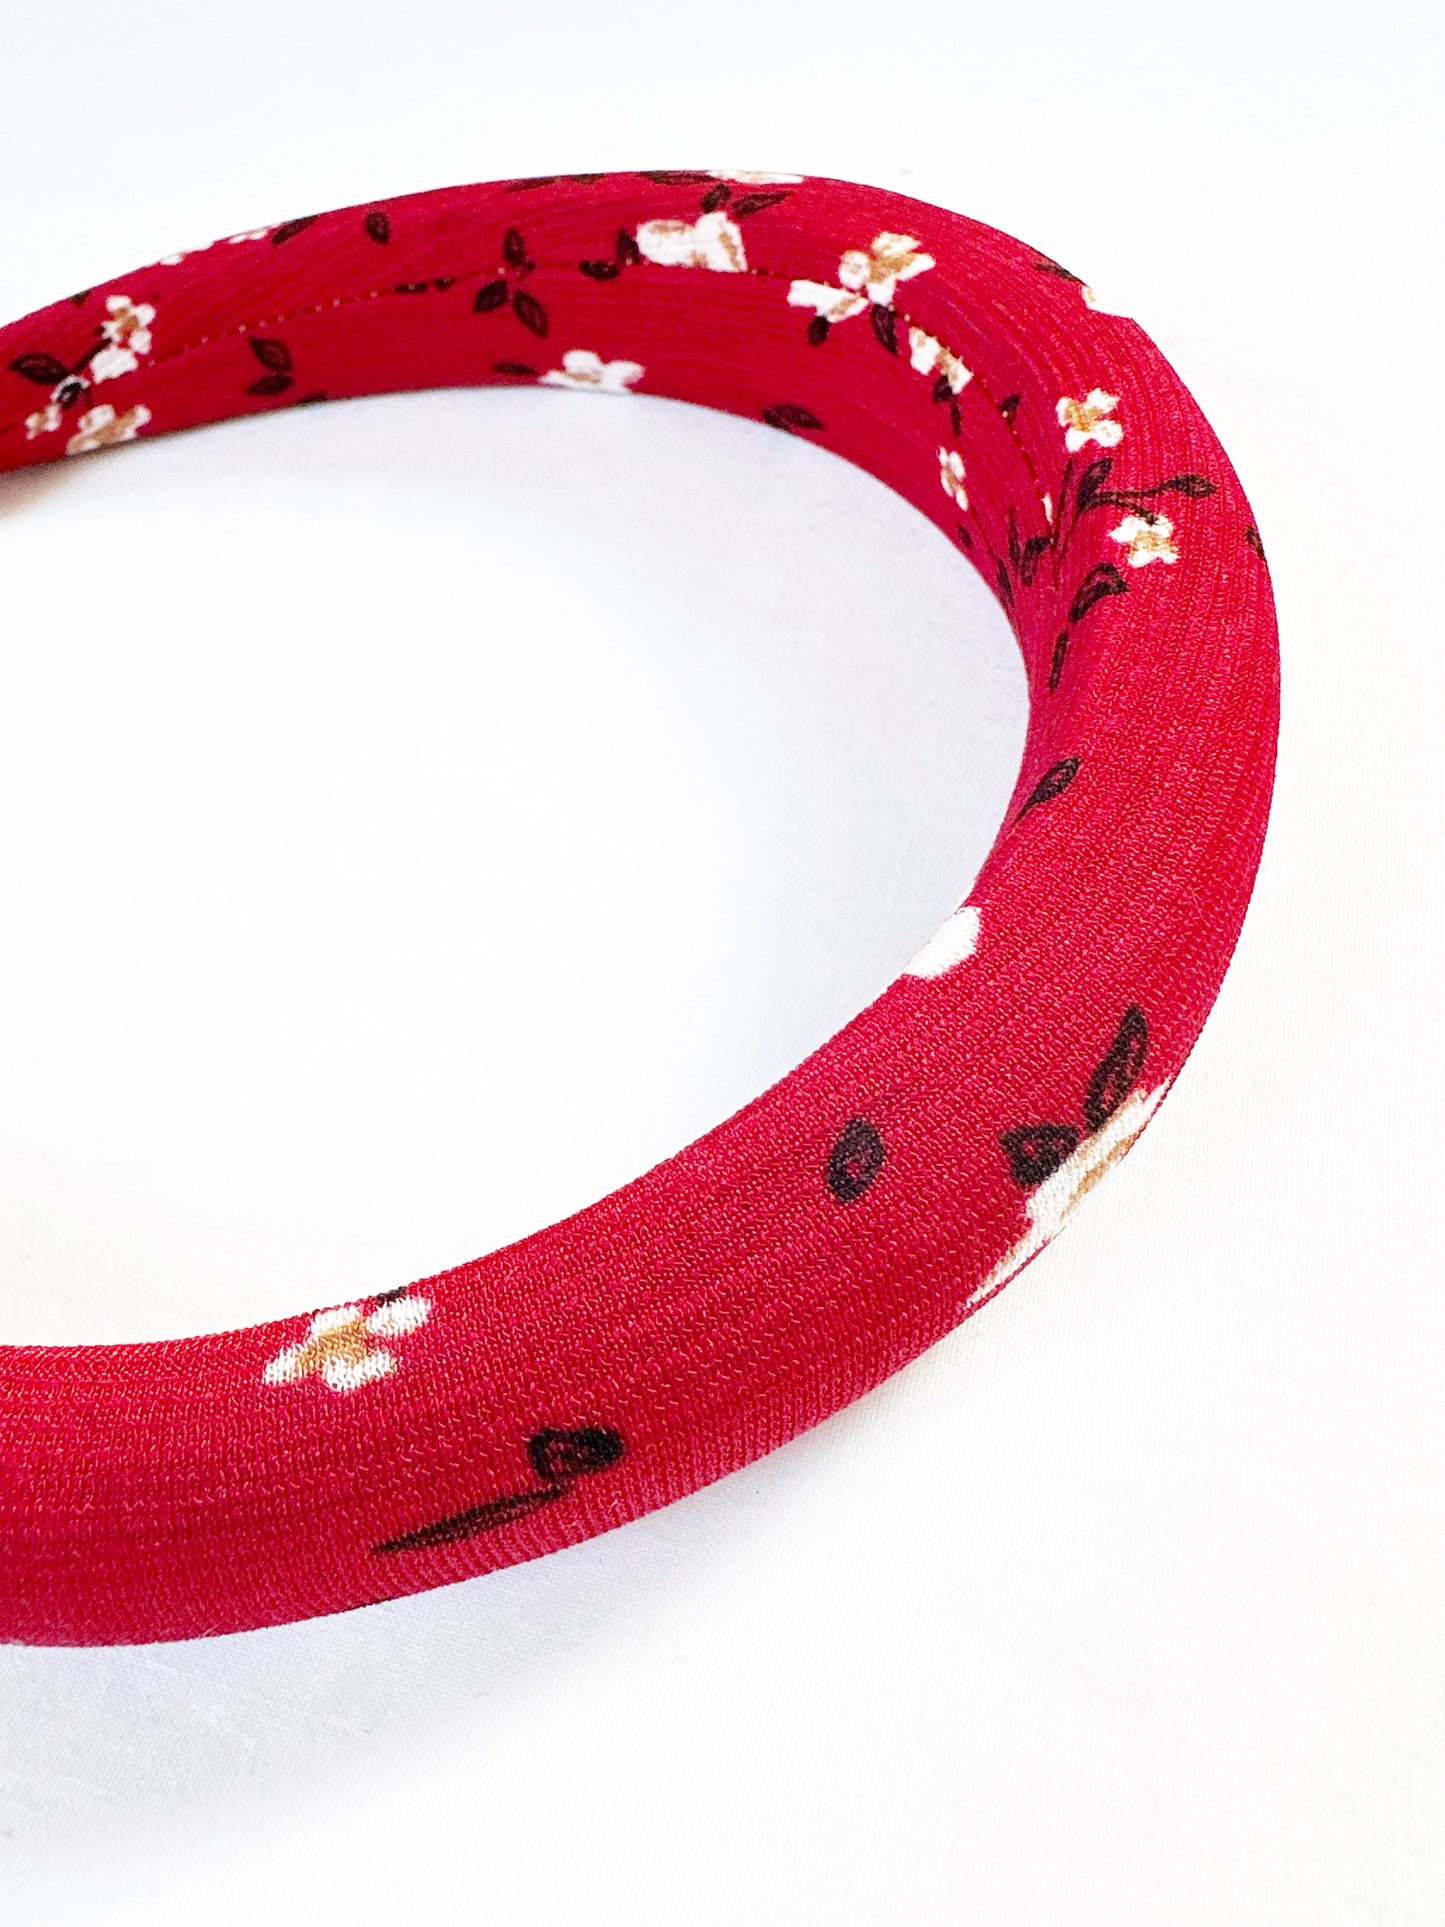 Classic Headband in red floral